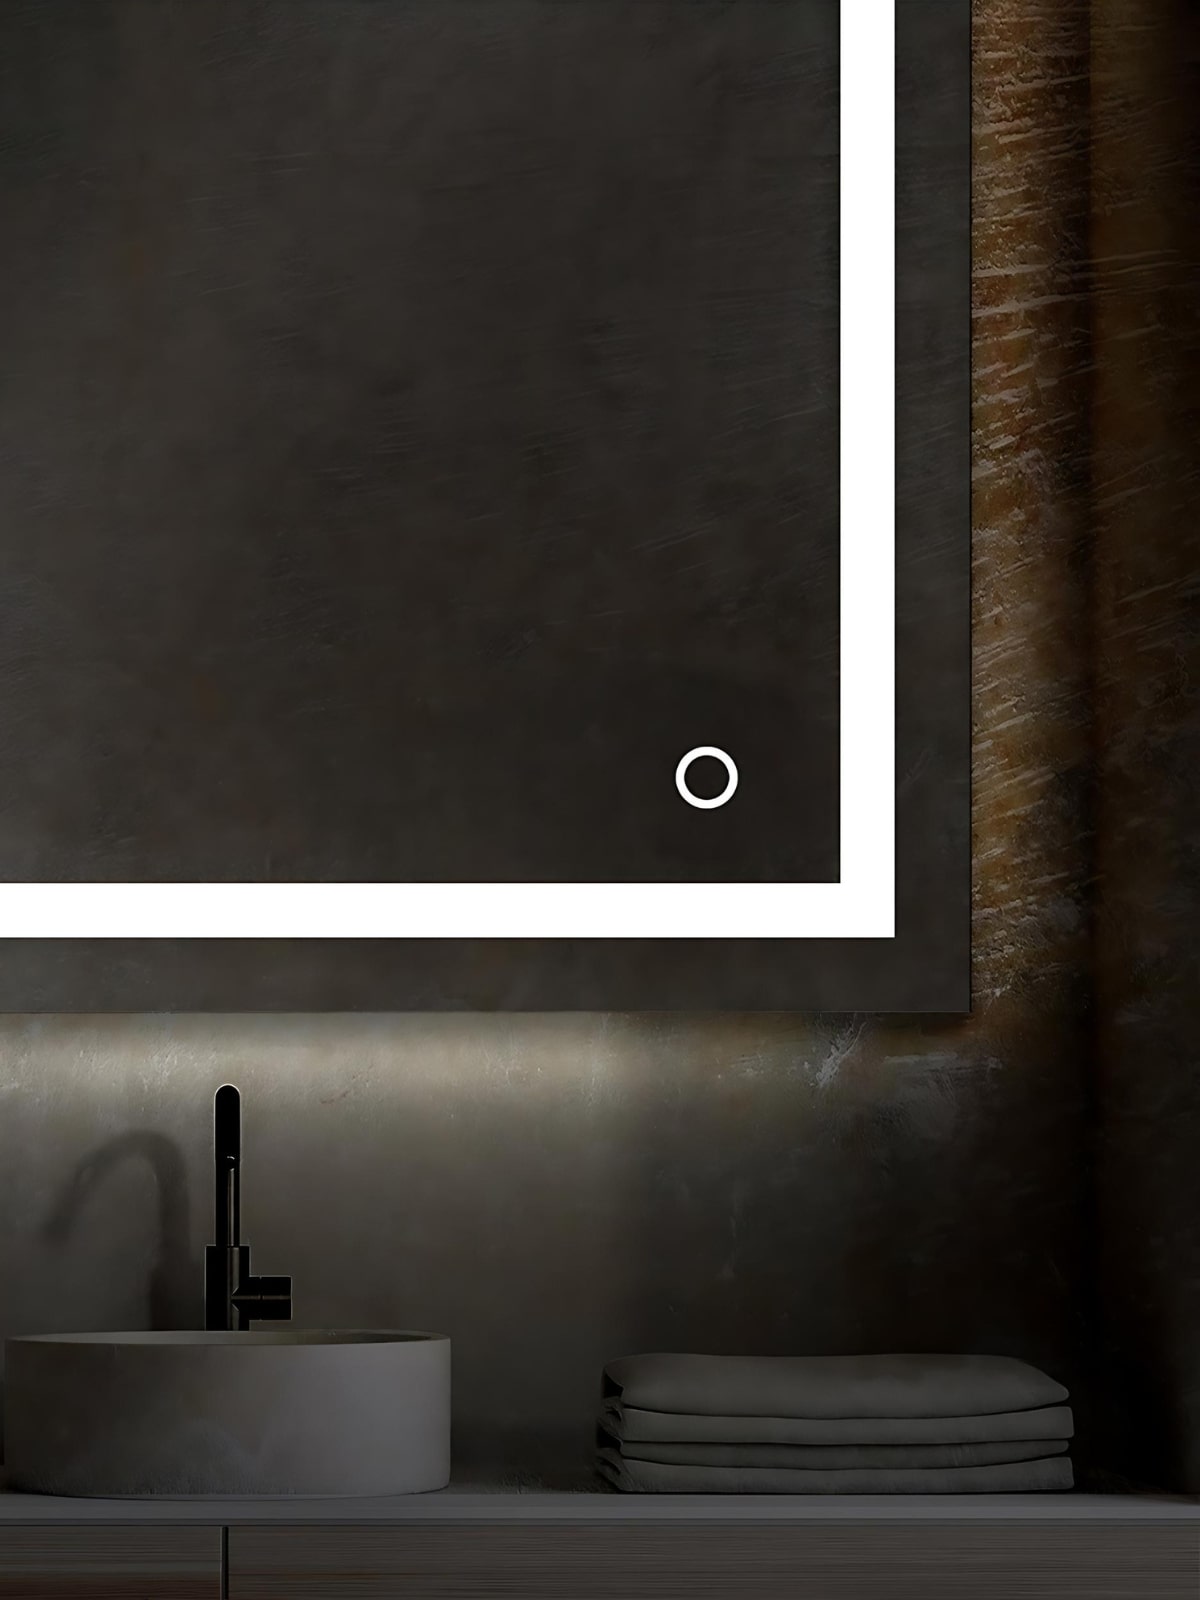 Illuminated mirrors come with a button that can hardwired into a bathroom switch if desired.